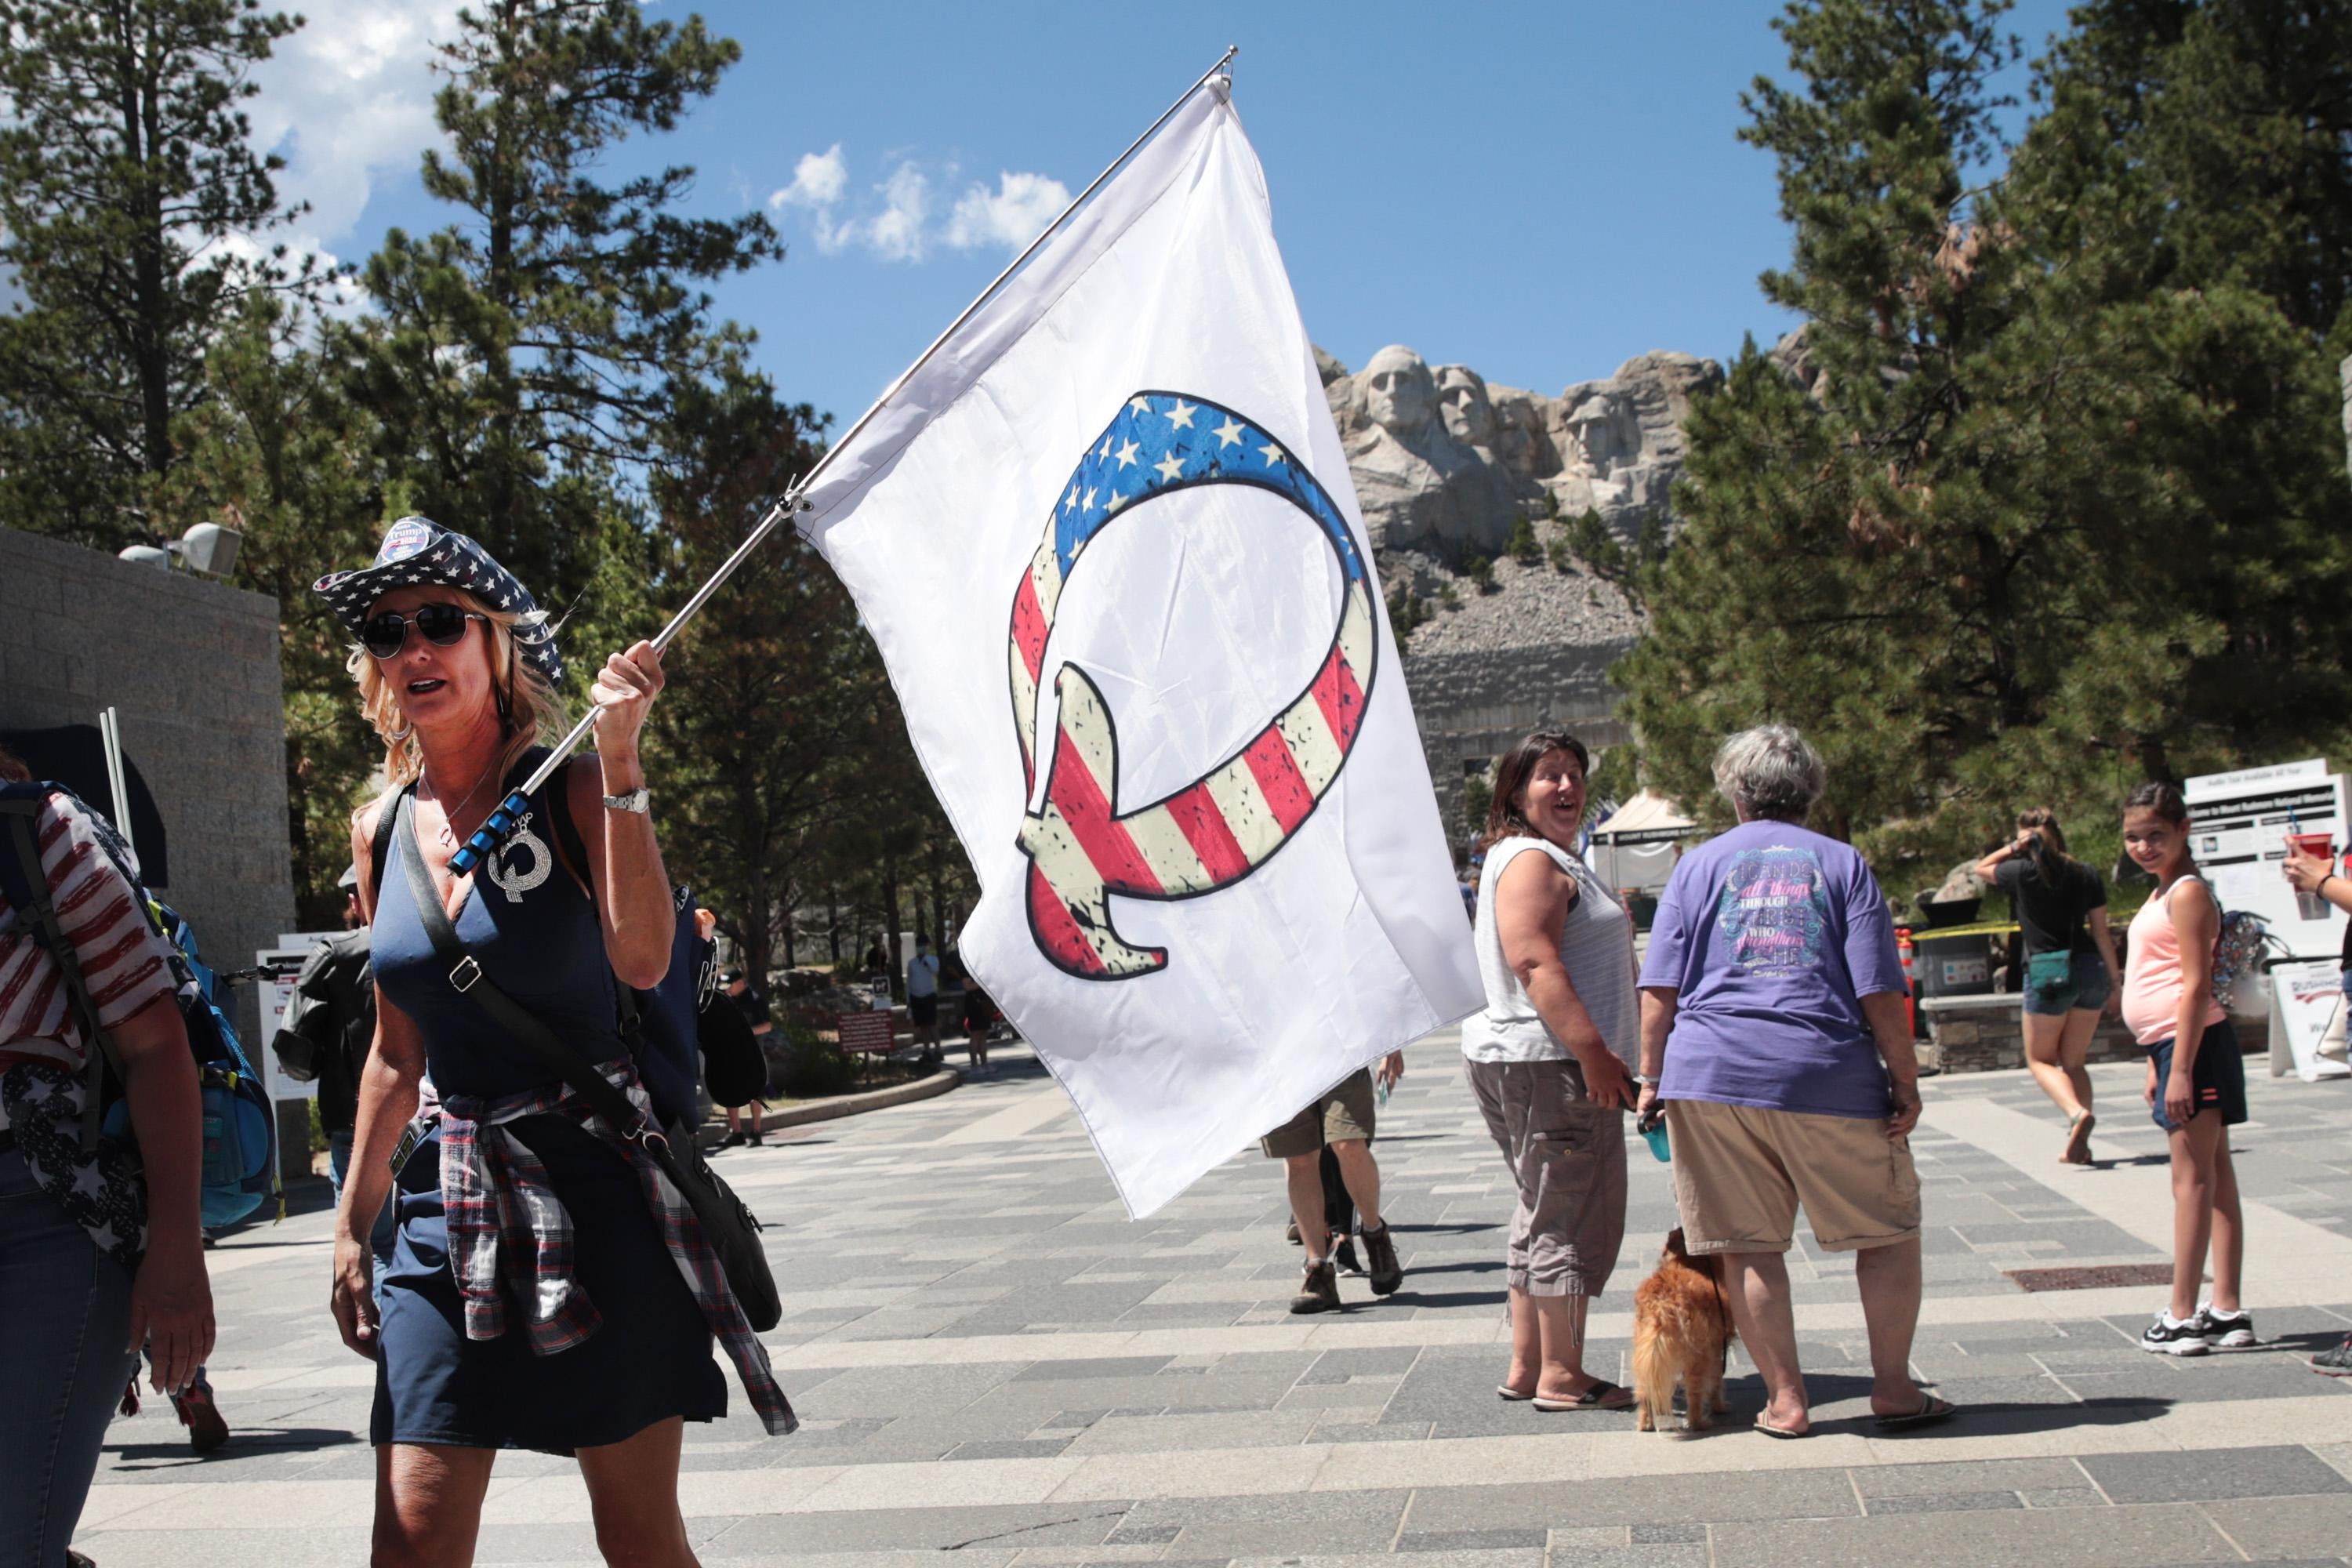 A person wearing blue and a cowboy hat walks while holding a white flag with the letter "Q." In the background Mount Rushmore is visible.